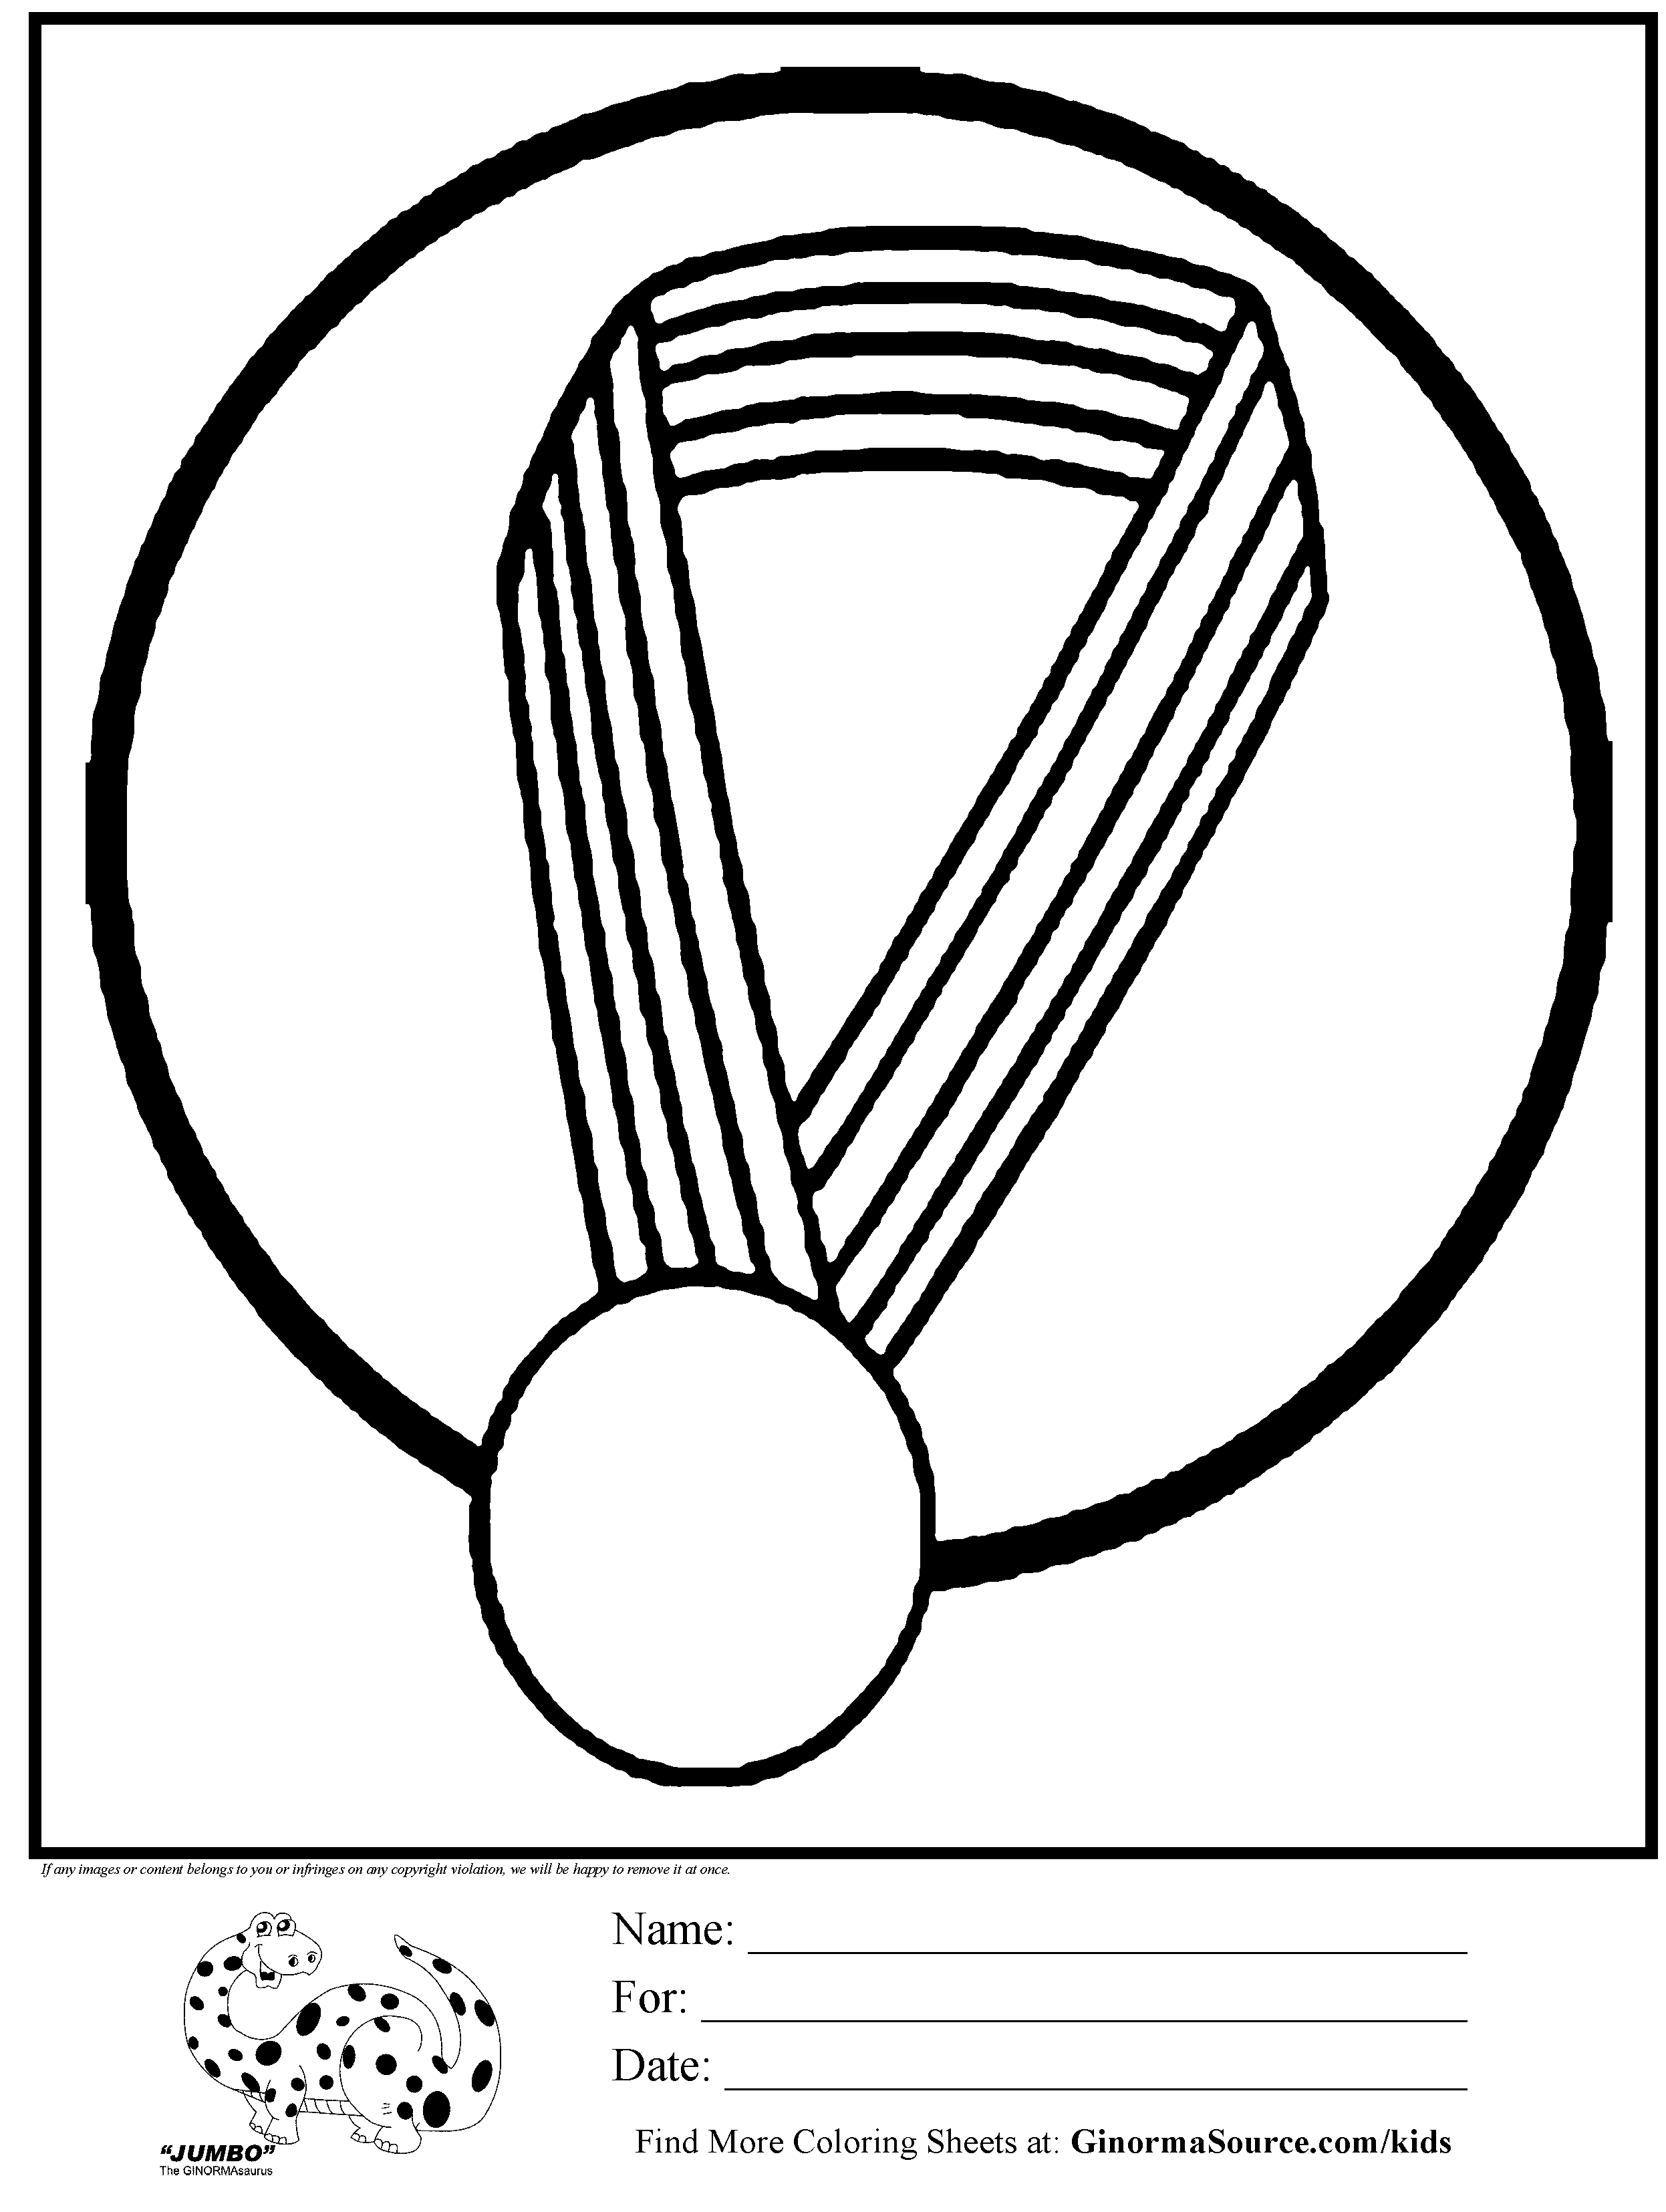 Olympic Coloring Page Gold Medal   Kids Activities   Pinterest